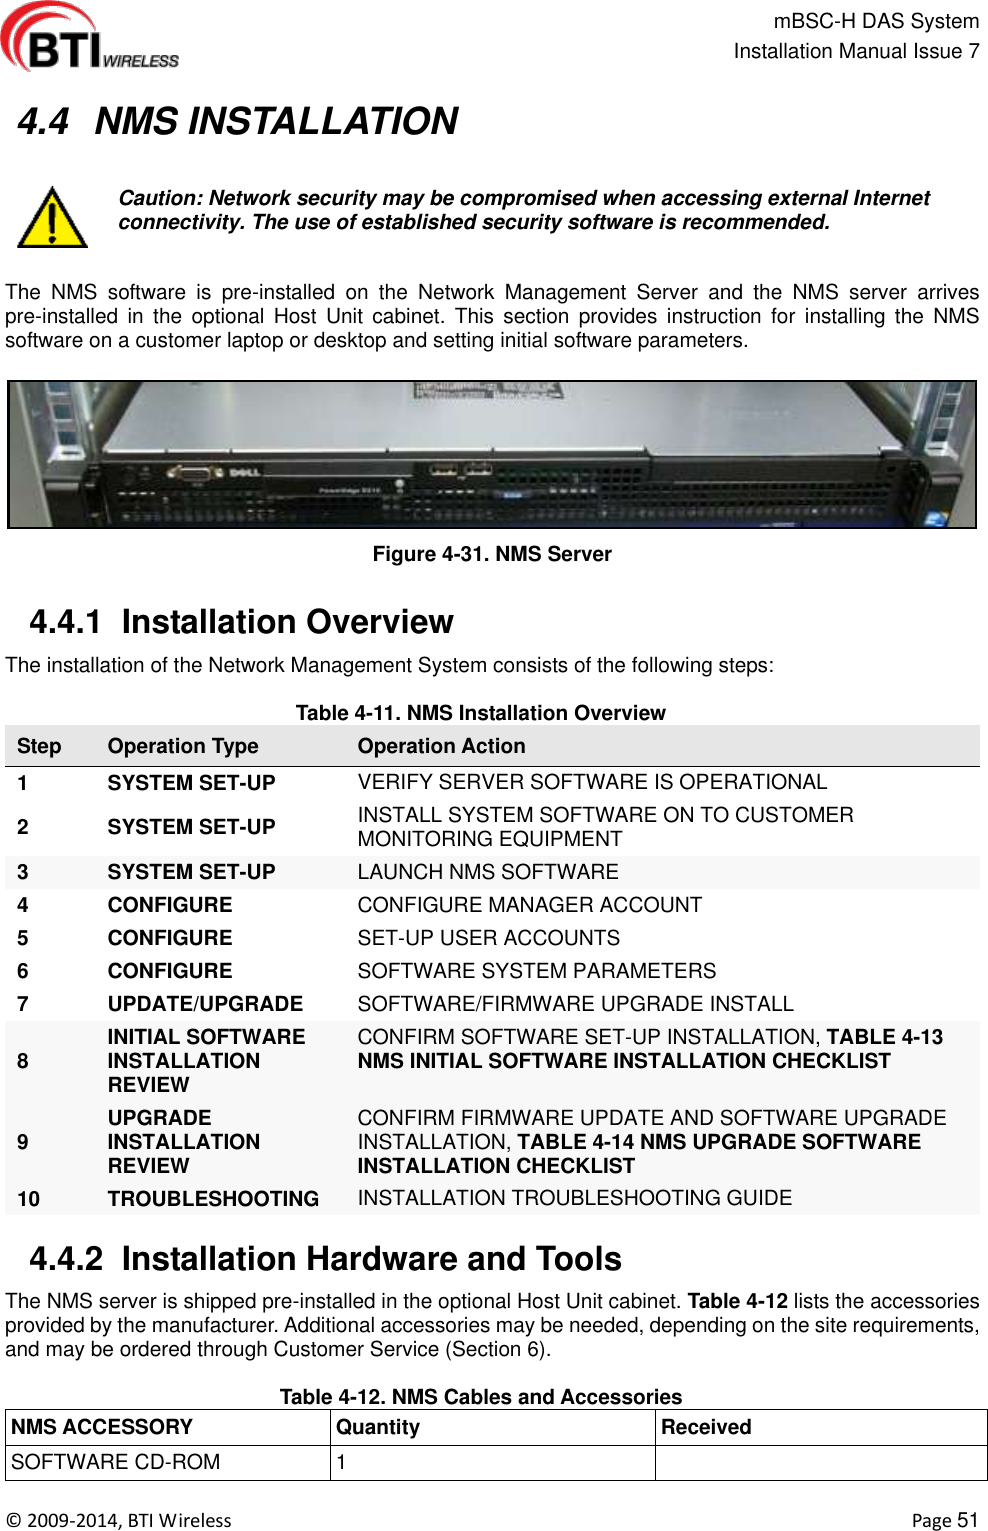                                                   mBSC-H DAS System   Installation Manual Issue 7  ©  2009-2014, BTI Wireless    Page 51   4.4  NMS INSTALLATION   Caution: Network security may be compromised when accessing external Internet connectivity. The use of established security software is recommended.  The  NMS  software  is  pre-installed  on  the  Network  Management  Server  and  the  NMS  server  arrives pre-installed in  the  optional  Host  Unit  cabinet.  This  section  provides  instruction  for  installing  the  NMS software on a customer laptop or desktop and setting initial software parameters.  Figure 4-31. NMS Server   4.4.1  Installation Overview The installation of the Network Management System consists of the following steps:  Table 4-11. NMS Installation Overview Step Operation Type Operation Action 1 SYSTEM SET-UP VERIFY SERVER SOFTWARE IS OPERATIONAL 2 SYSTEM SET-UP INSTALL SYSTEM SOFTWARE ON TO CUSTOMER   MONITORING EQUIPMENT 3 SYSTEM SET-UP LAUNCH NMS SOFTWARE 4 CONFIGURE CONFIGURE MANAGER ACCOUNT 5 CONFIGURE SET-UP USER ACCOUNTS 6 CONFIGURE SOFTWARE SYSTEM PARAMETERS 7 UPDATE/UPGRADE SOFTWARE/FIRMWARE UPGRADE INSTALL 8 INITIAL SOFTWARE INSTALLATION REVIEW CONFIRM SOFTWARE SET-UP INSTALLATION, TABLE 4-13 NMS INITIAL SOFTWARE INSTALLATION CHECKLIST 9 UPGRADE INSTALLATION REVIEW CONFIRM FIRMWARE UPDATE AND SOFTWARE UPGRADE INSTALLATION, TABLE 4-14 NMS UPGRADE SOFTWARE INSTALLATION CHECKLIST 10 TROUBLESHOOTING INSTALLATION TROUBLESHOOTING GUIDE   4.4.2  Installation Hardware and Tools The NMS server is shipped pre-installed in the optional Host Unit cabinet. Table 4-12 lists the accessories provided by the manufacturer. Additional accessories may be needed, depending on the site requirements, and may be ordered through Customer Service (Section 6).  Table 4-12. NMS Cables and Accessories NMS ACCESSORY Quantity Received SOFTWARE CD-ROM 1  